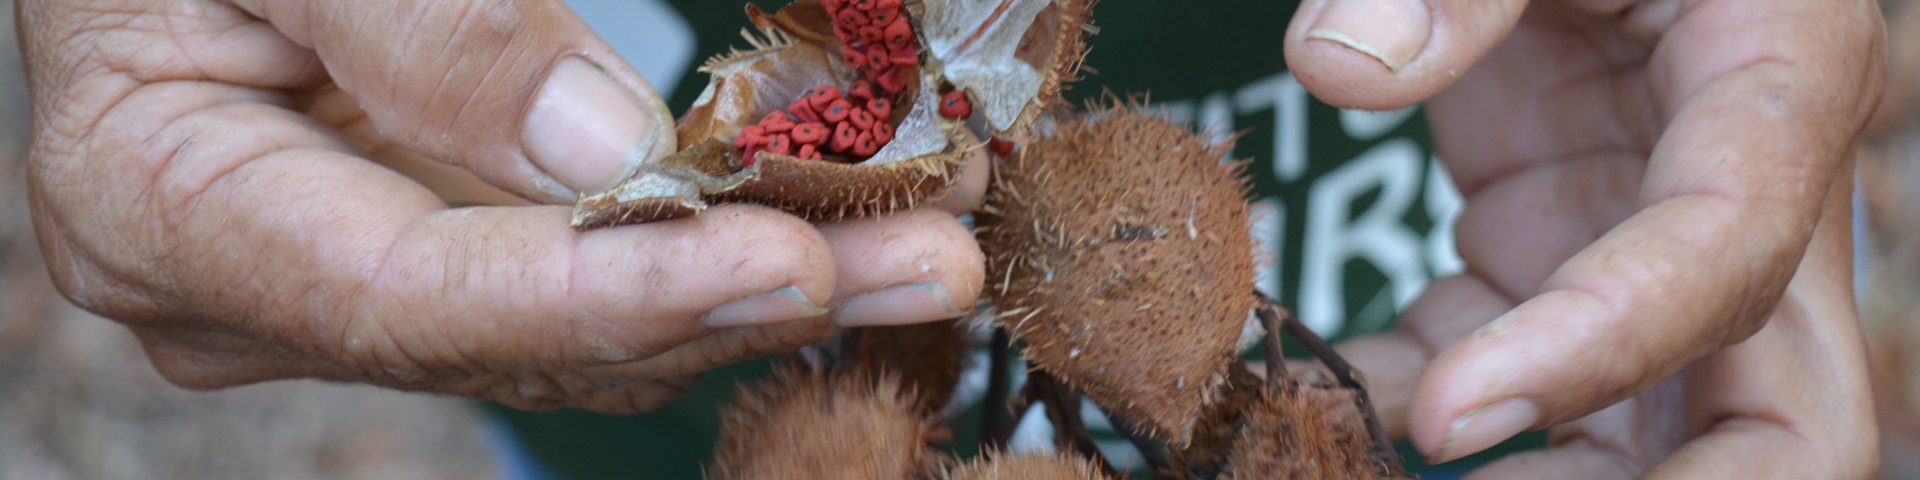 A person holding an annatto fruit in their hands.